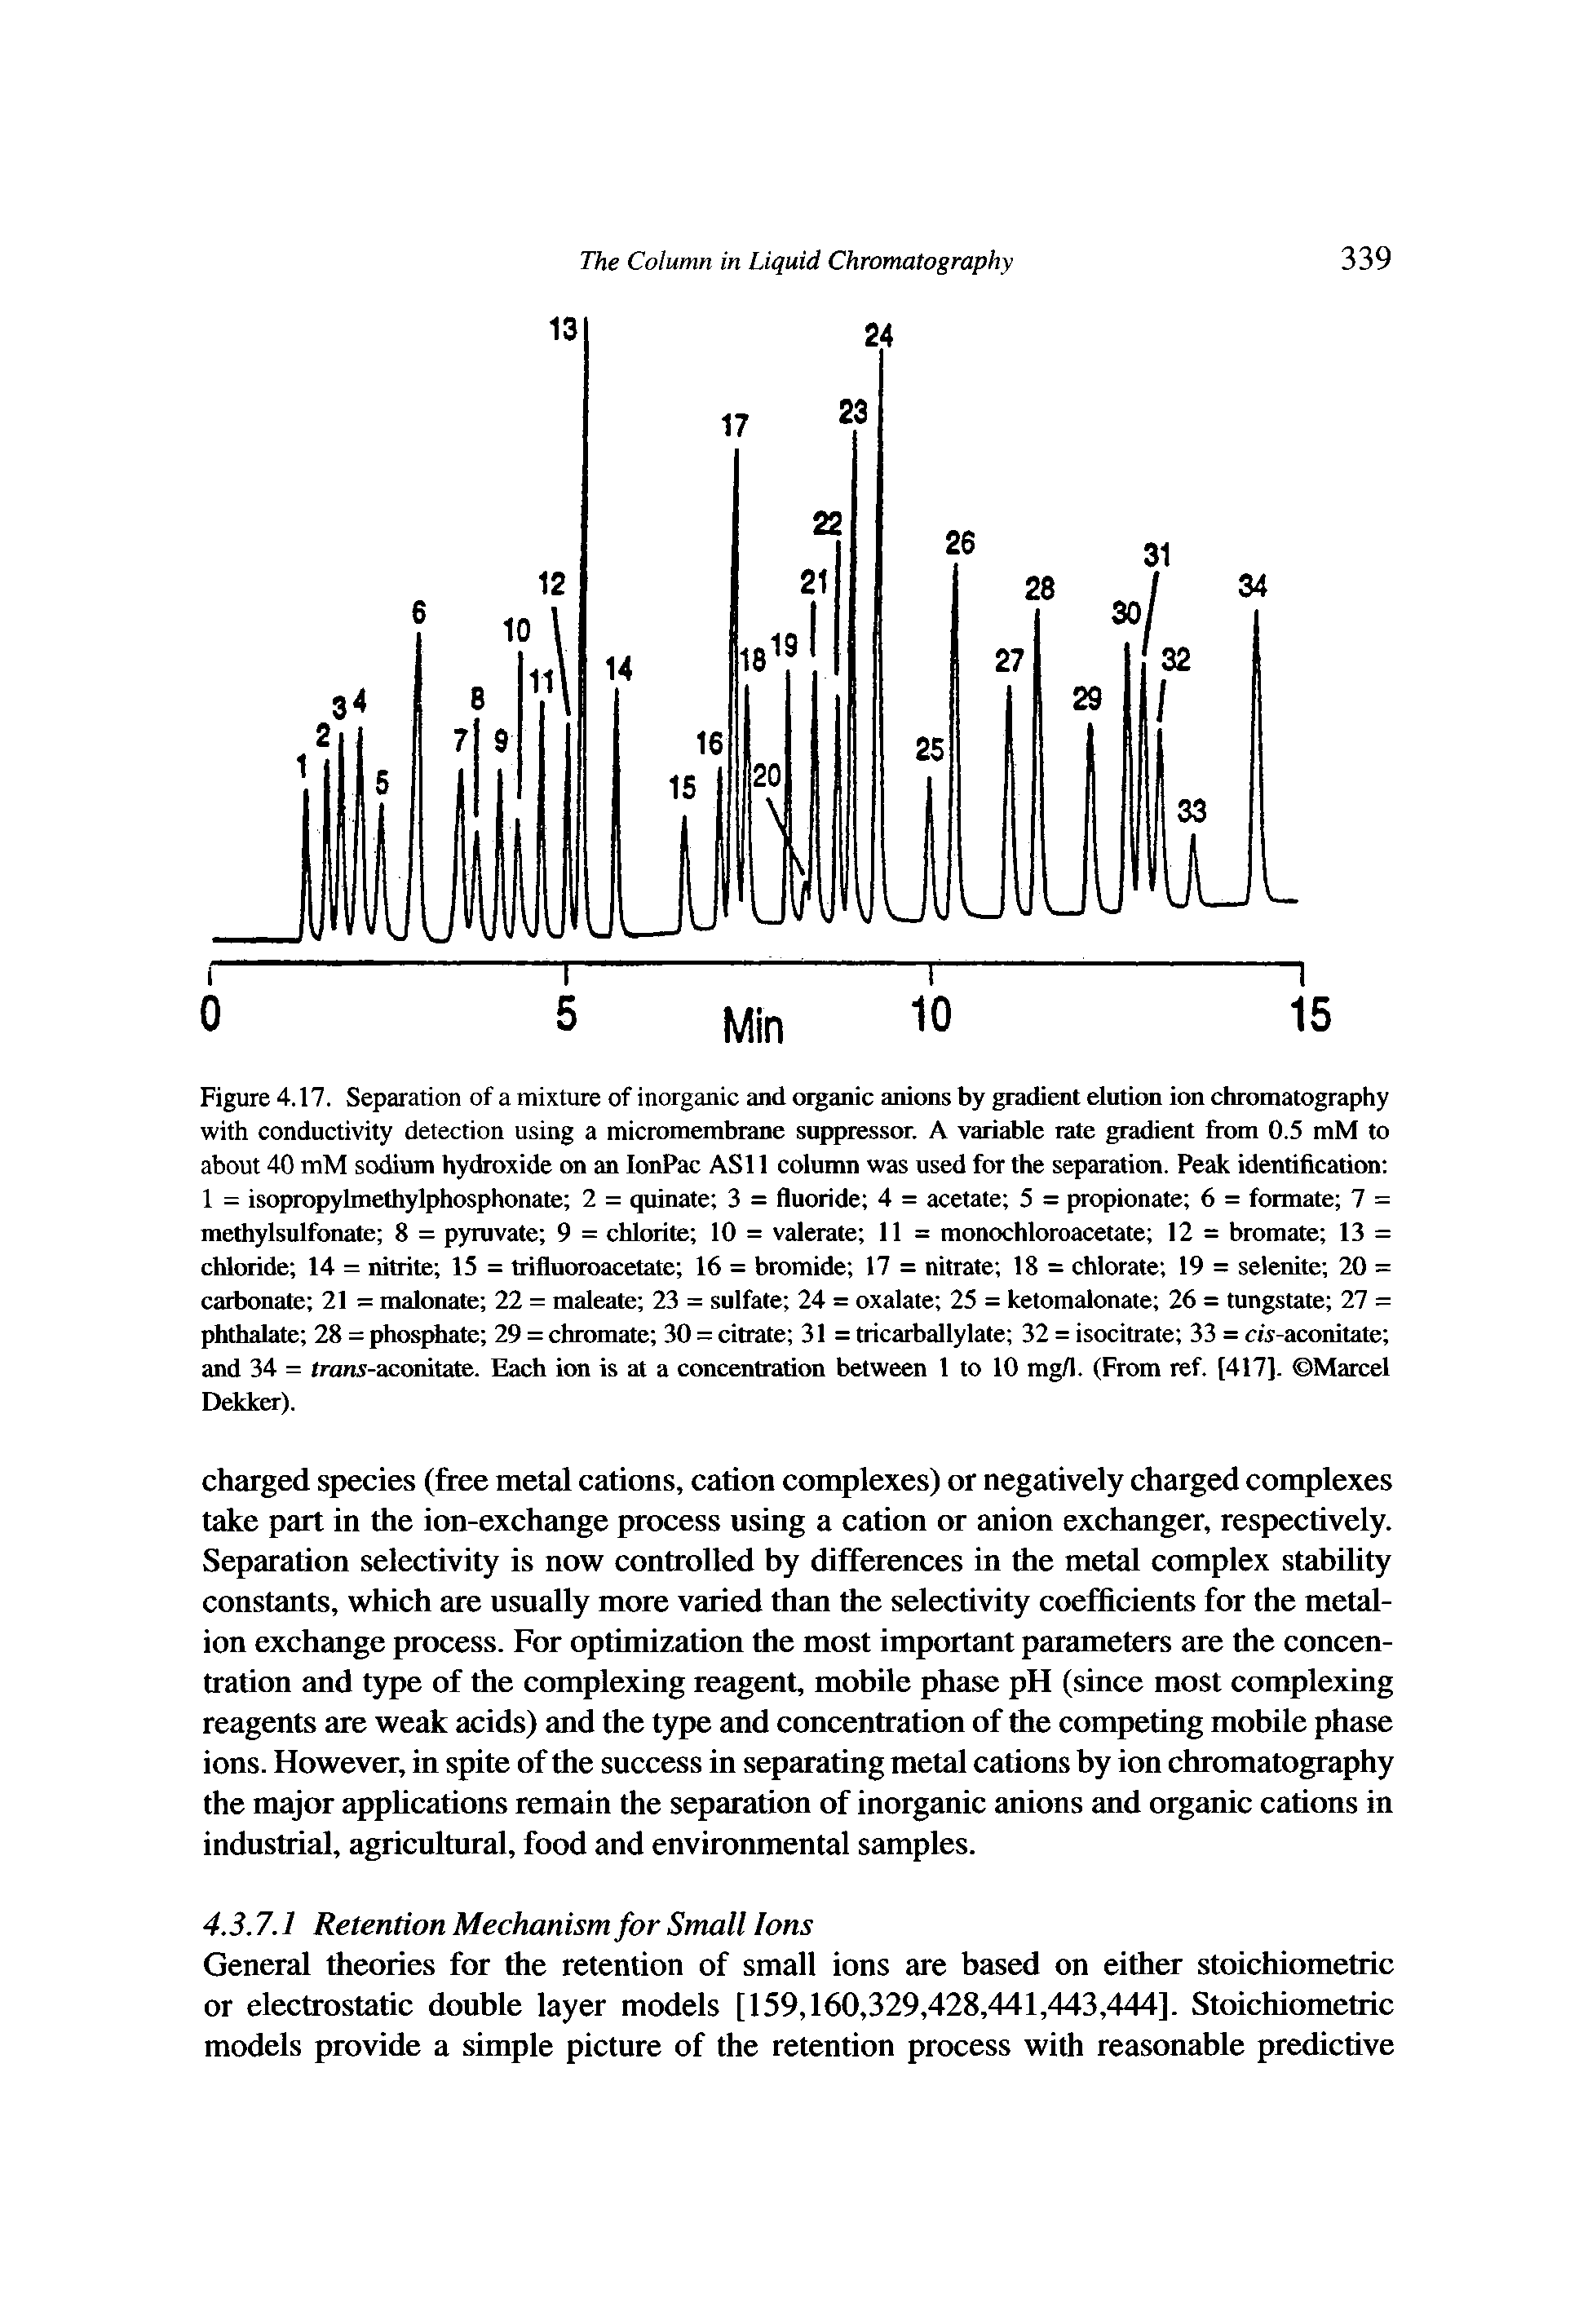 Figure 4.17. Separation of a mixture of inorganic and organic anions by gradient elution ion chromatography with conductivity detection using a micromembrane suppressor. A variable rate gradient from 0.5 mM to about 40 mM sodium hydroxide on an lonPac ASH column was used for the separation. Peak identification 1 = isopropylmethylphosphonate 2 = quinate 3 = fluoride 4 = acetate 5 = propionate 6 = formate 7 = methylsulfonate 8 = pyruvate 9 = chlorite 10 = valerate 11 - monochloroacetate 12 - bromate 13 = chloride 14 = nitrite 15 = trifluoroacetate 16 = bromide 17 = nitrate 18 = chlorate 19 = selenite 20 = carbonate 21 = malonate 22 = maleate 23 = sulfate 24 = oxalate 25 = ketomalonate 26 = tungstate 27 = phthalate 28 = phosphate 29 = chromate 30 = citrate 31 = tricarballylate 32 = isocitrate 33 = cis-aconitate and 34 = trans-aconitate. Each ion is at a concentration between 1 to 10 mg/1. (From ref. [417]. Marcel Dekker).